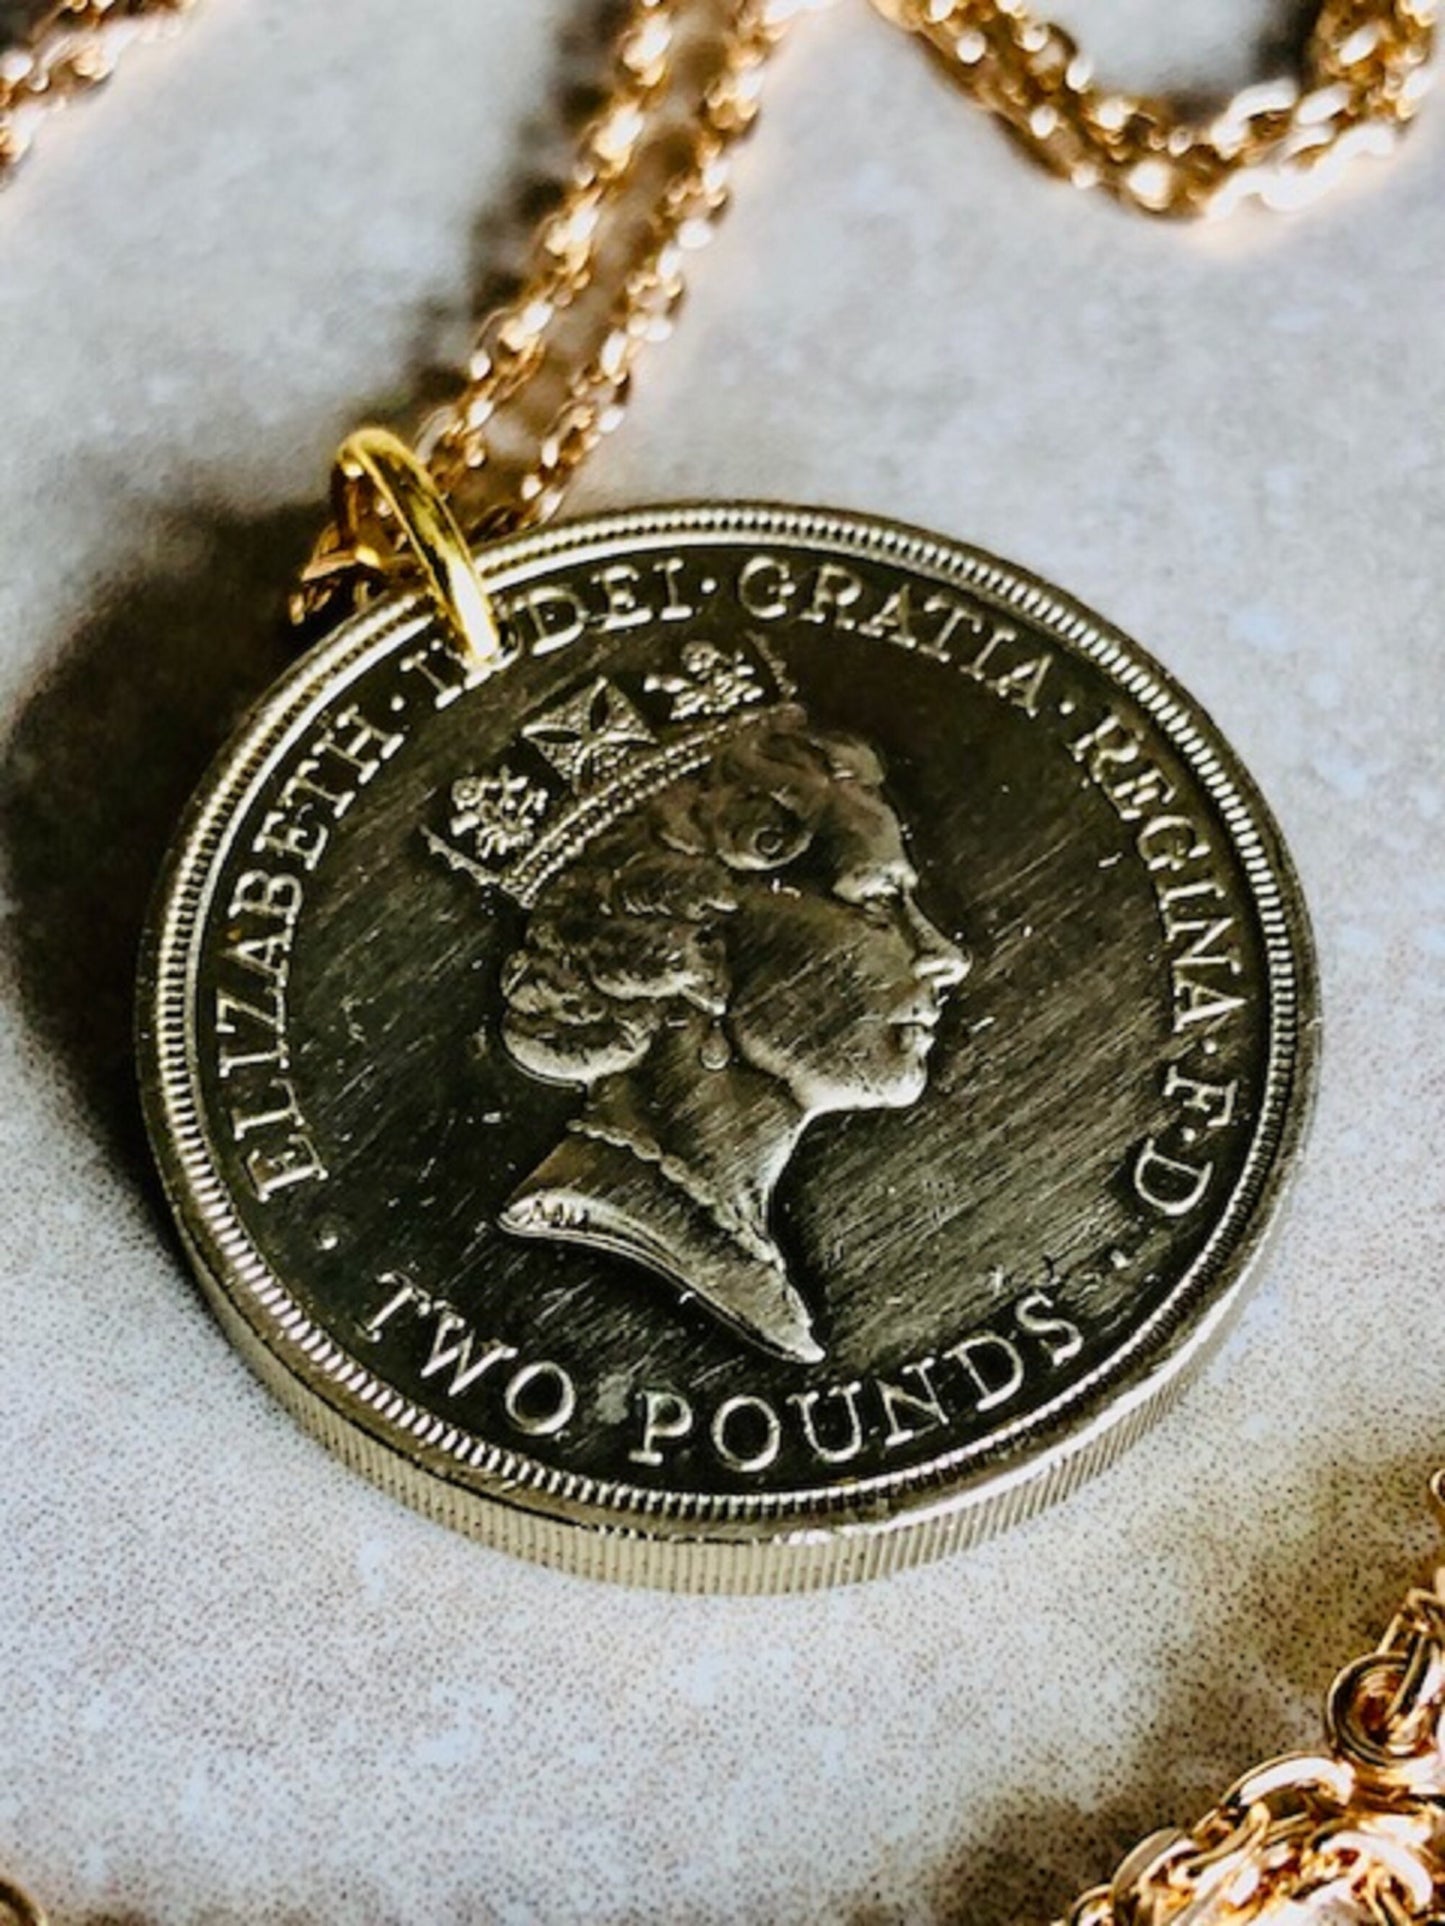 British Bill Of Rights 2 Pound 1989 Coin United Kingdom Queen Elizabeth Jewelry Personal Necklace Gift Friend Charm Him Her World Collector